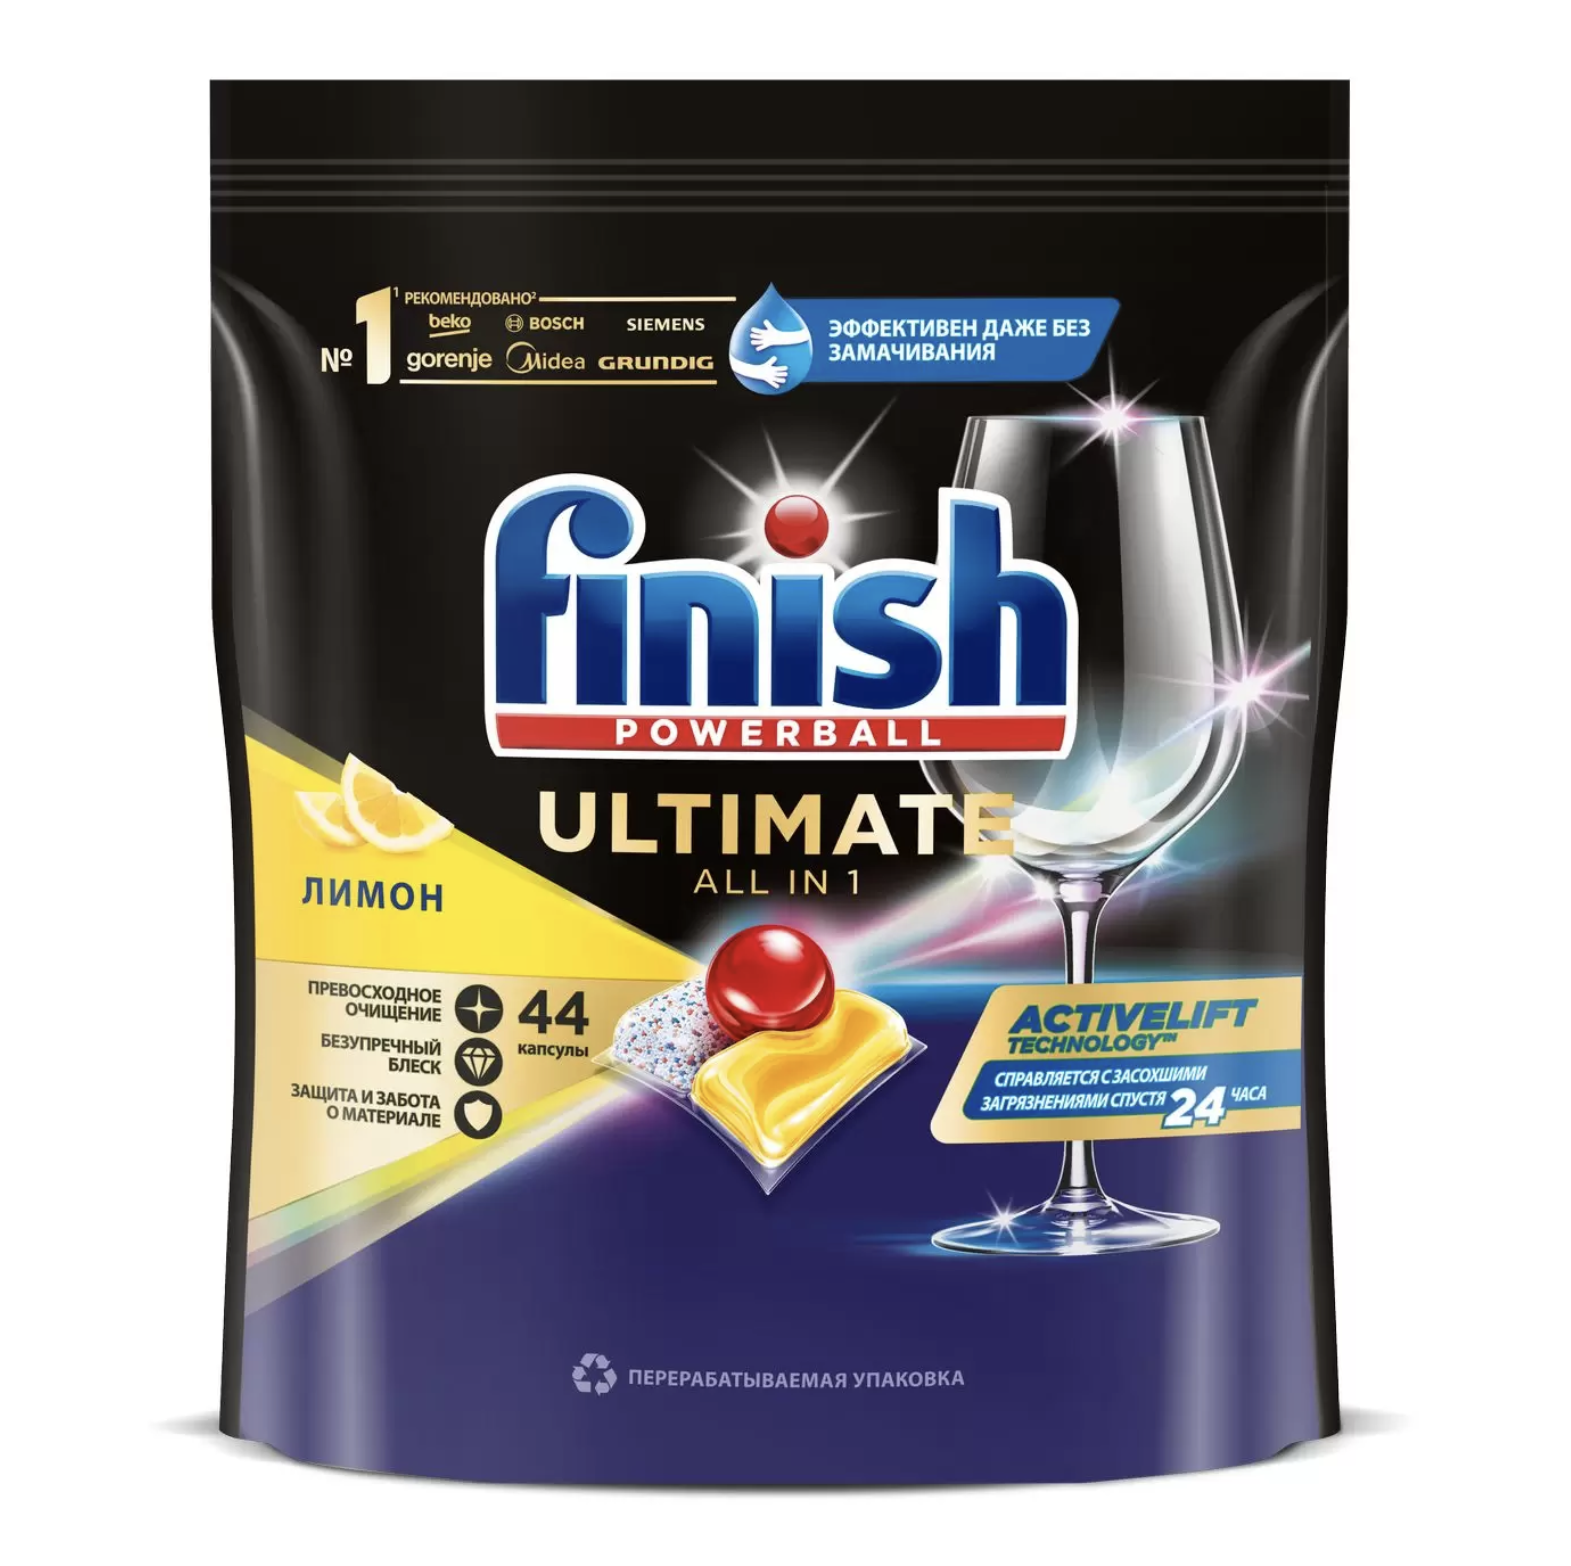   / Finish All In 1 PowerBall  Ultimate -      44 